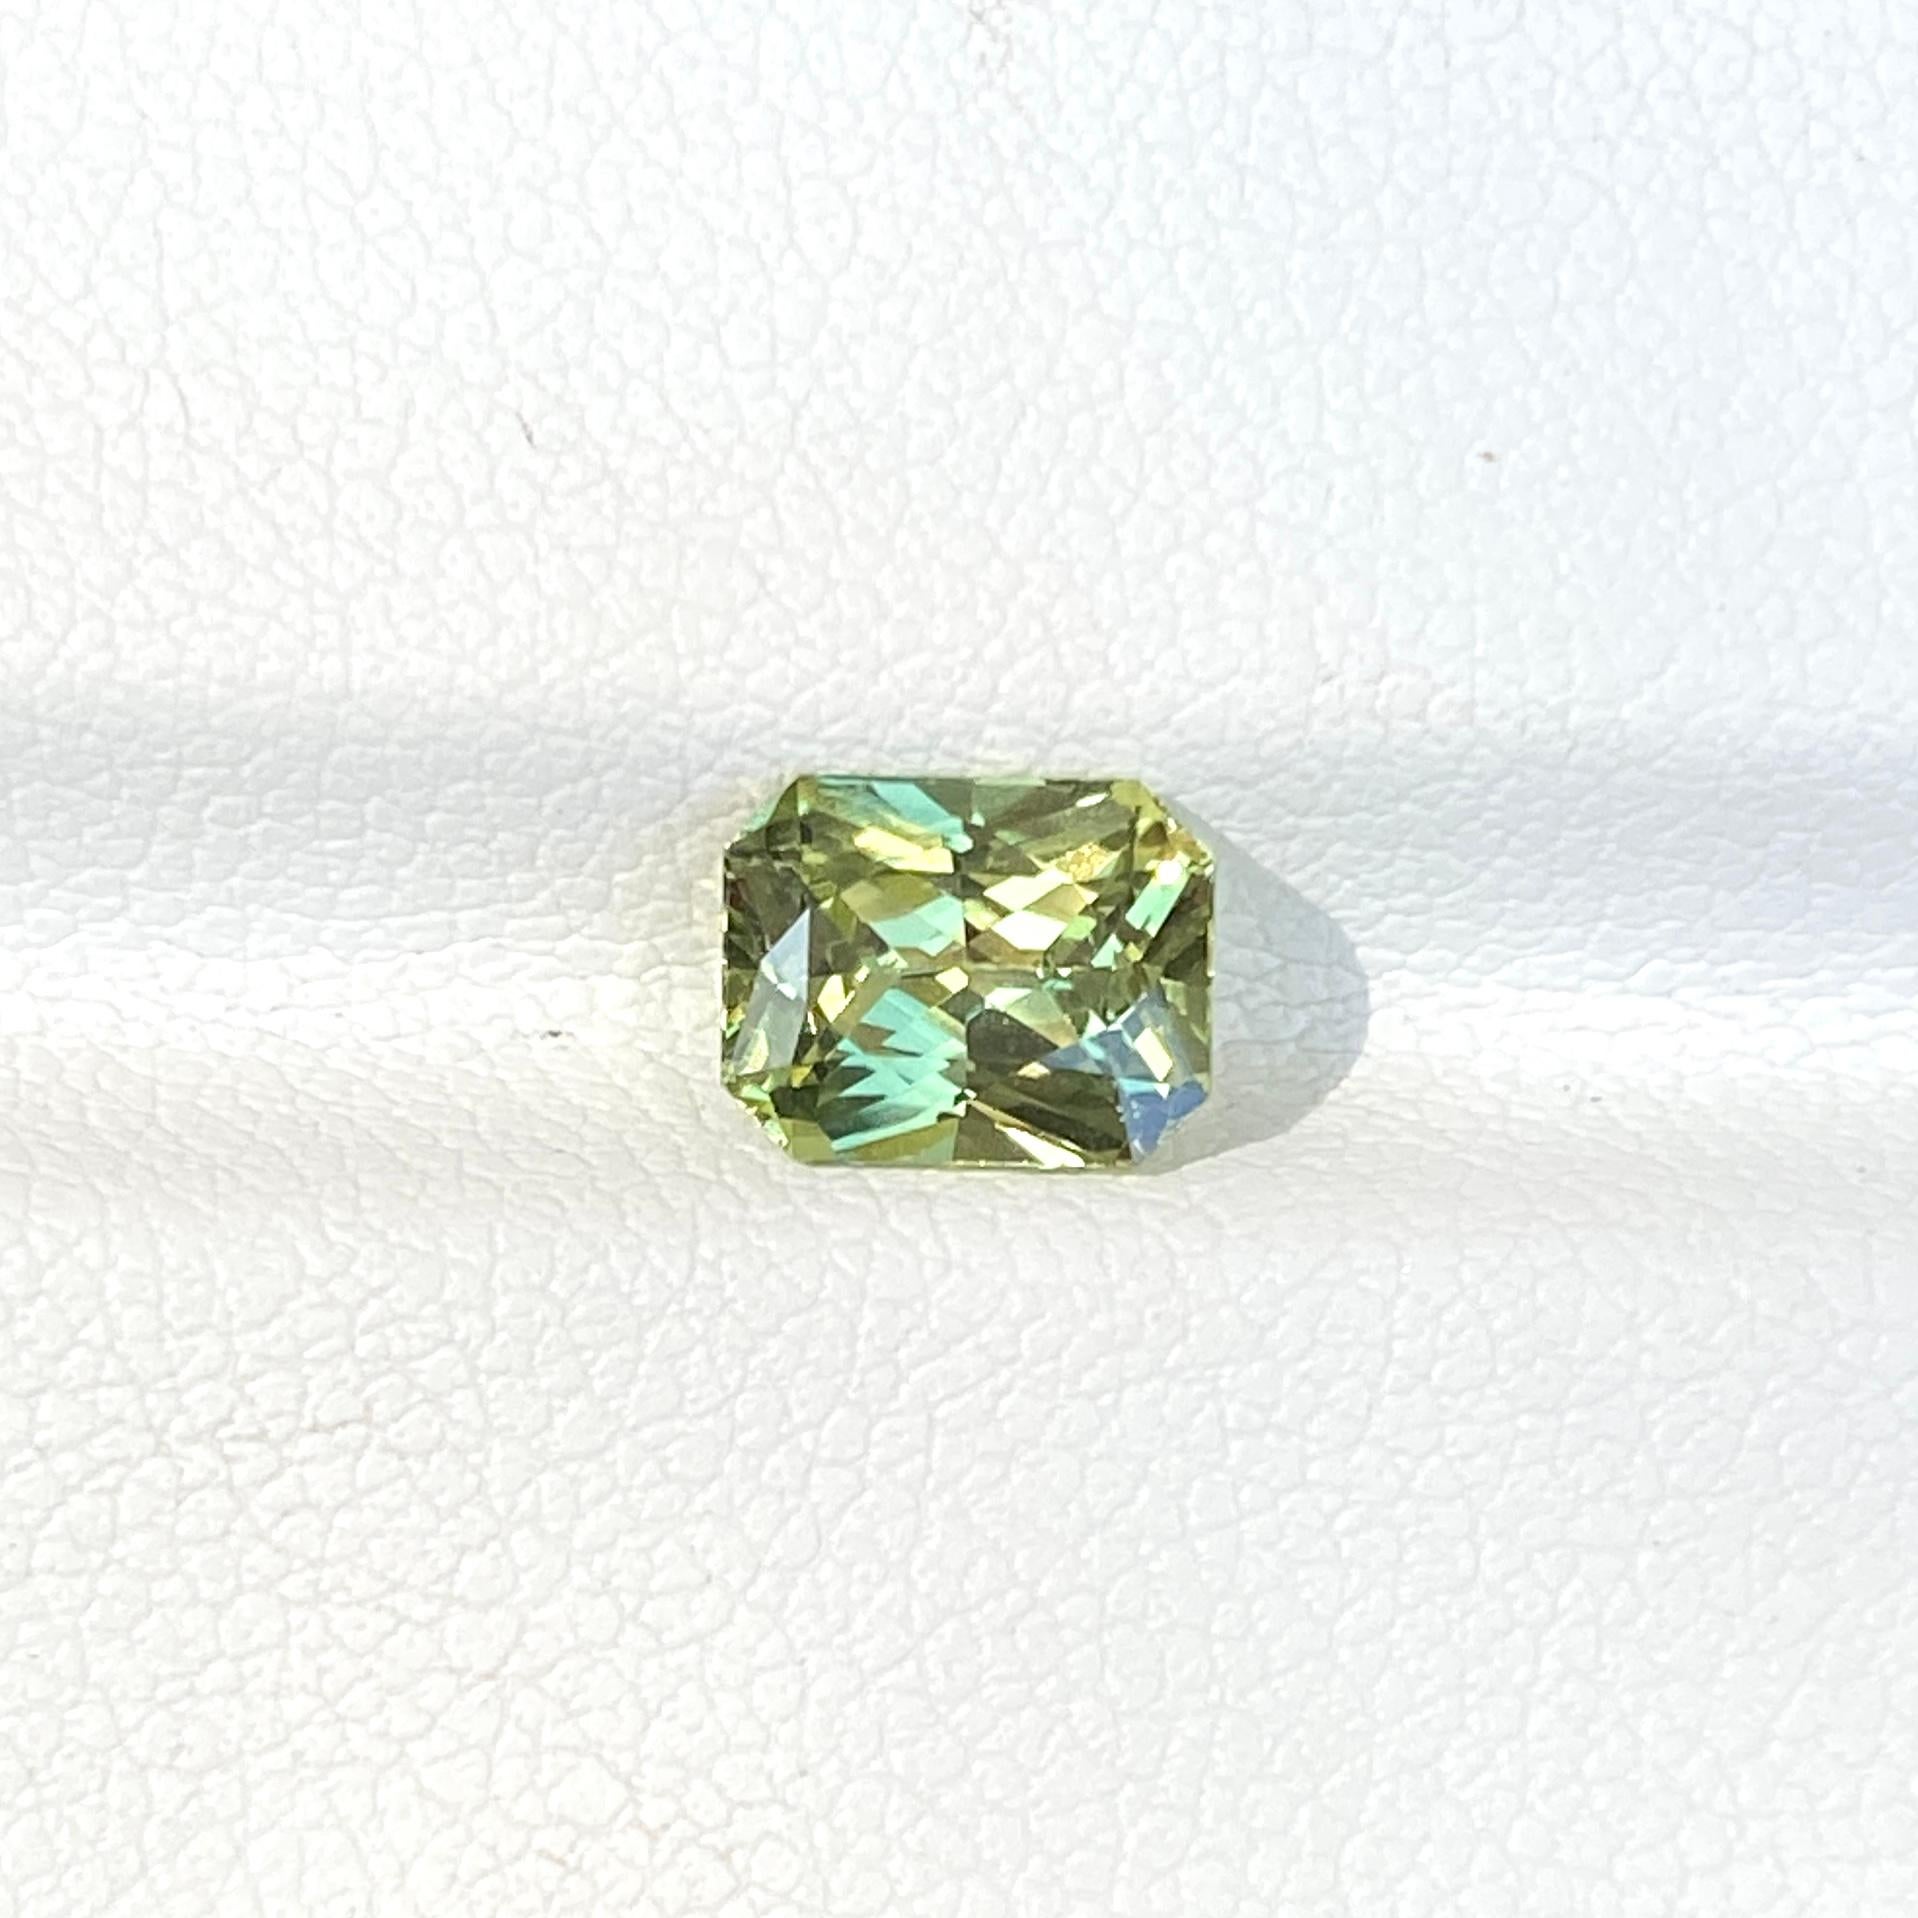 Fresh and zesty with citrus hints of lemon and lime is this natural mint green sapphire radiant cut to over 1 carat and certified unheated from Madagascar. 

This mint green sapphire is available to purchase as a loose sapphire or contact us to